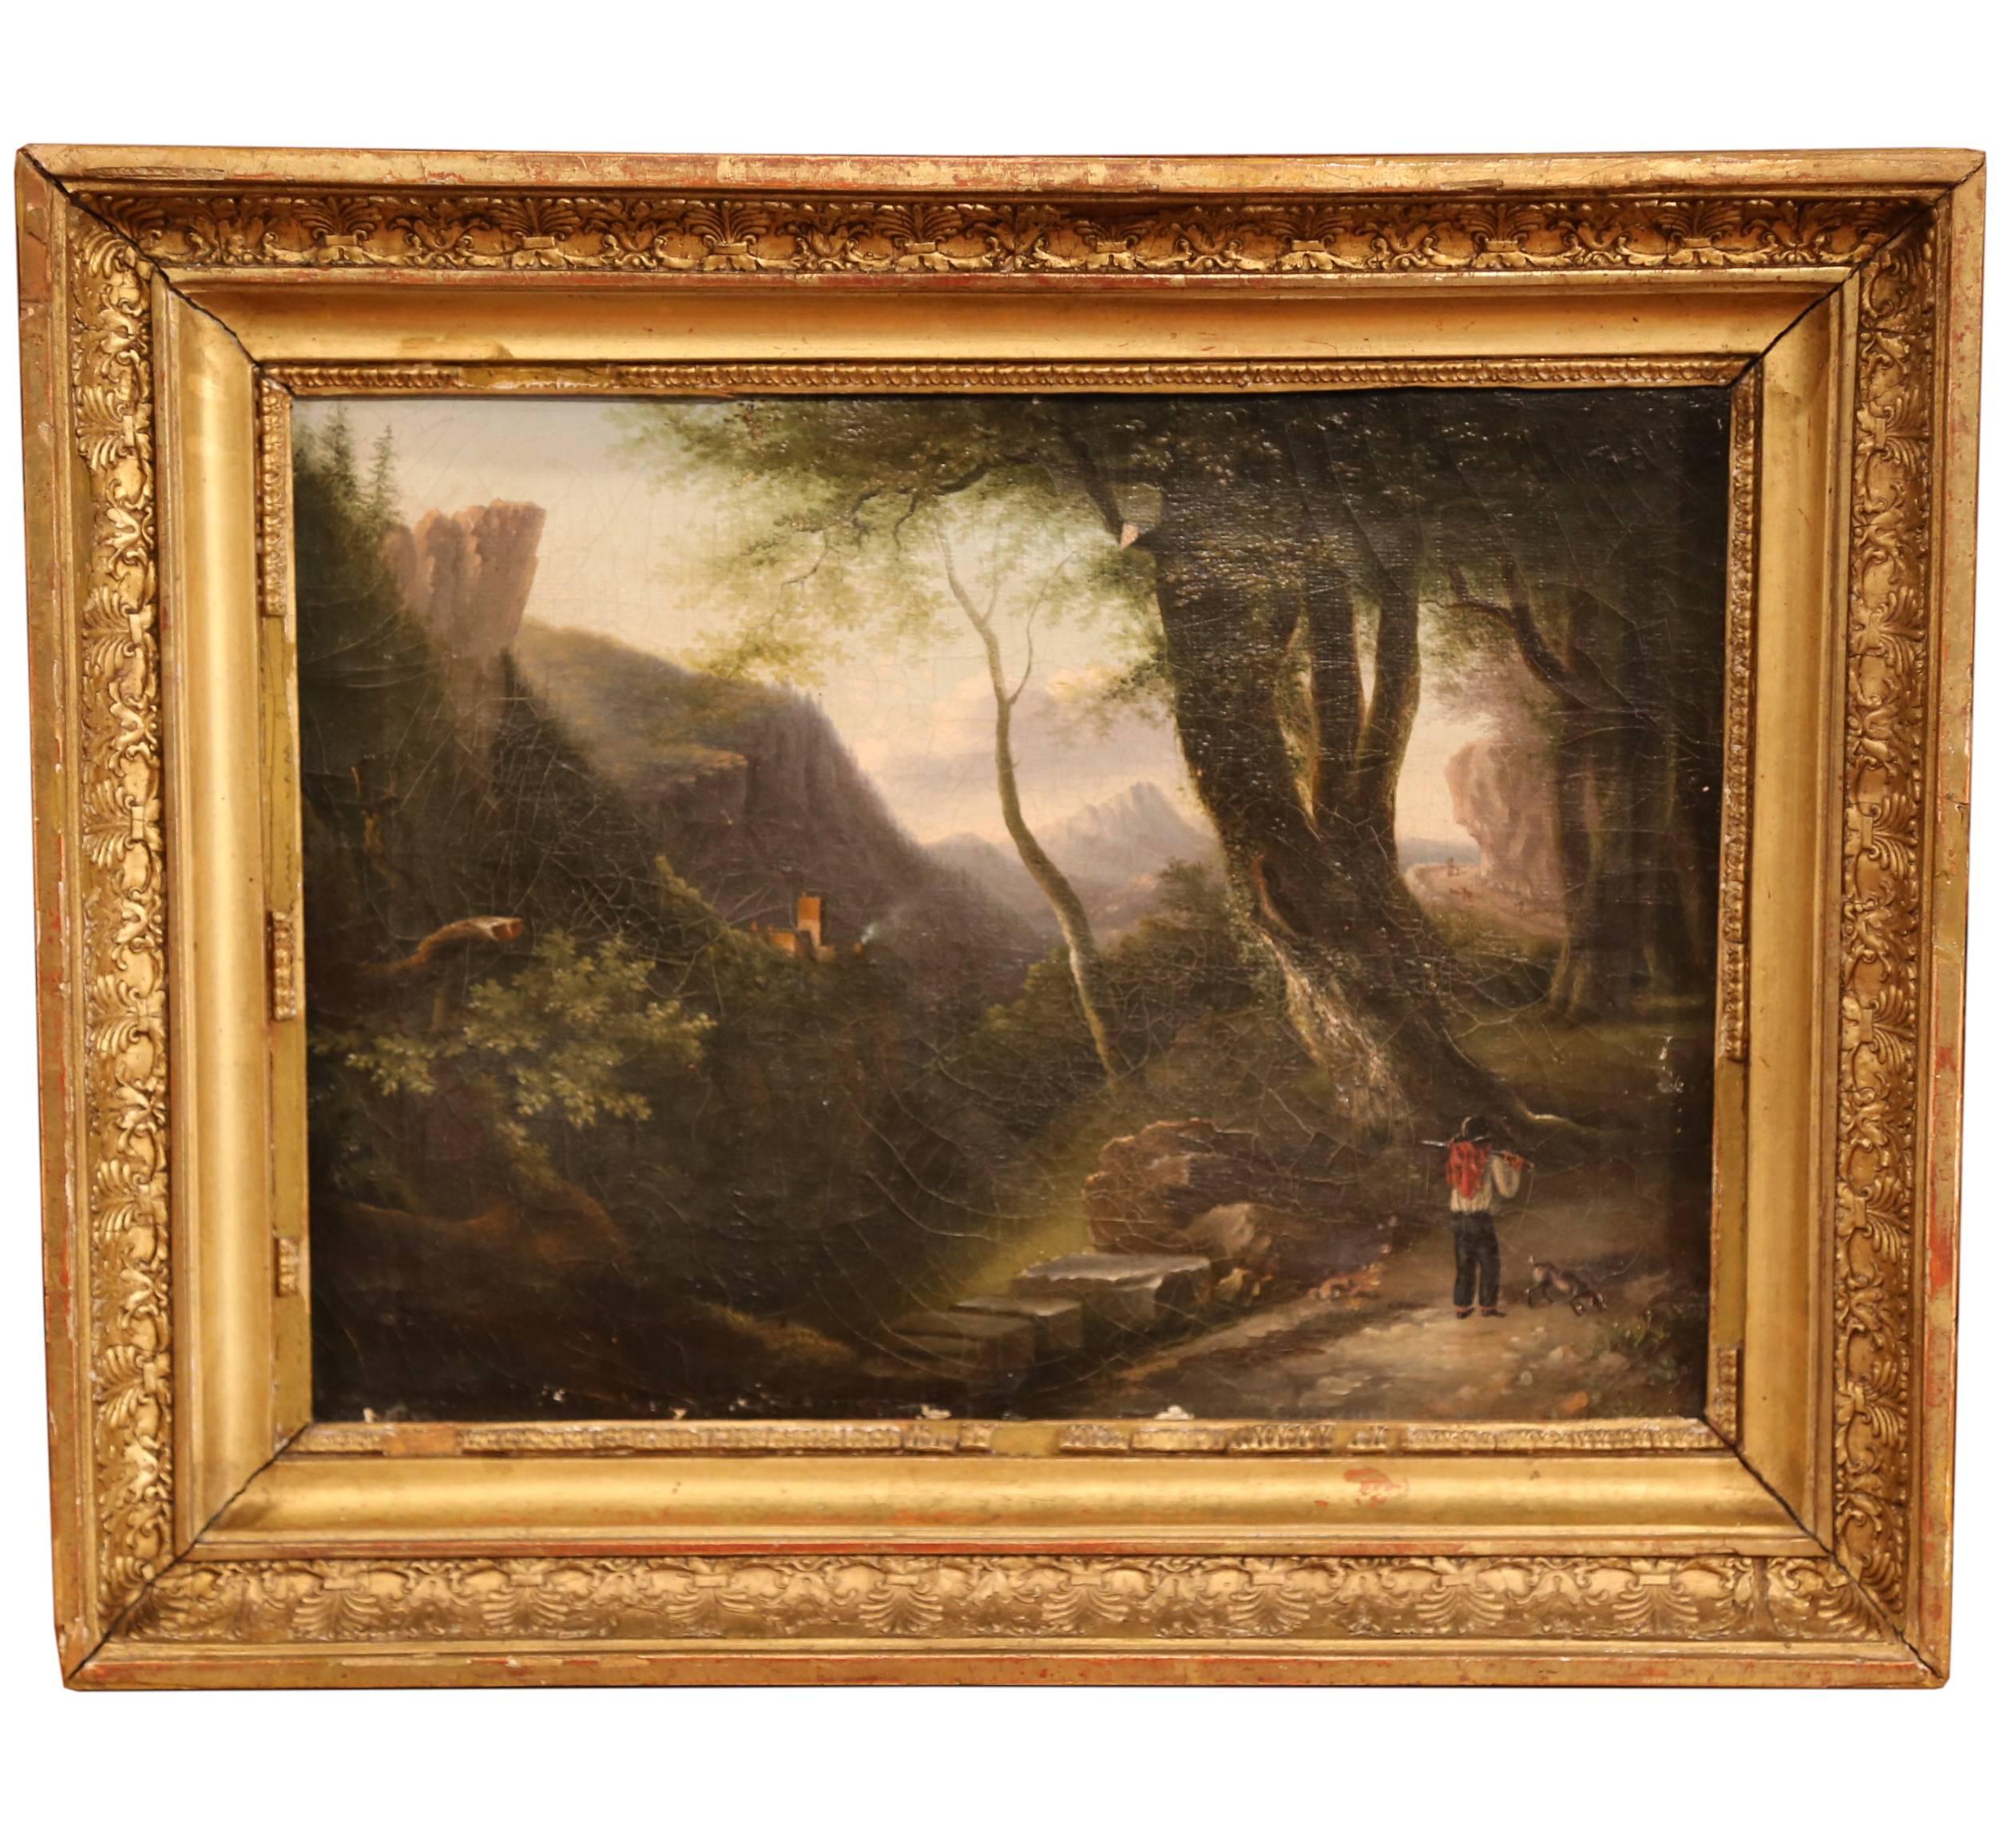 Unknown Landscape Painting - 19th Century French Oil on Canvas Pastoral Painting in Original Gilt Frame